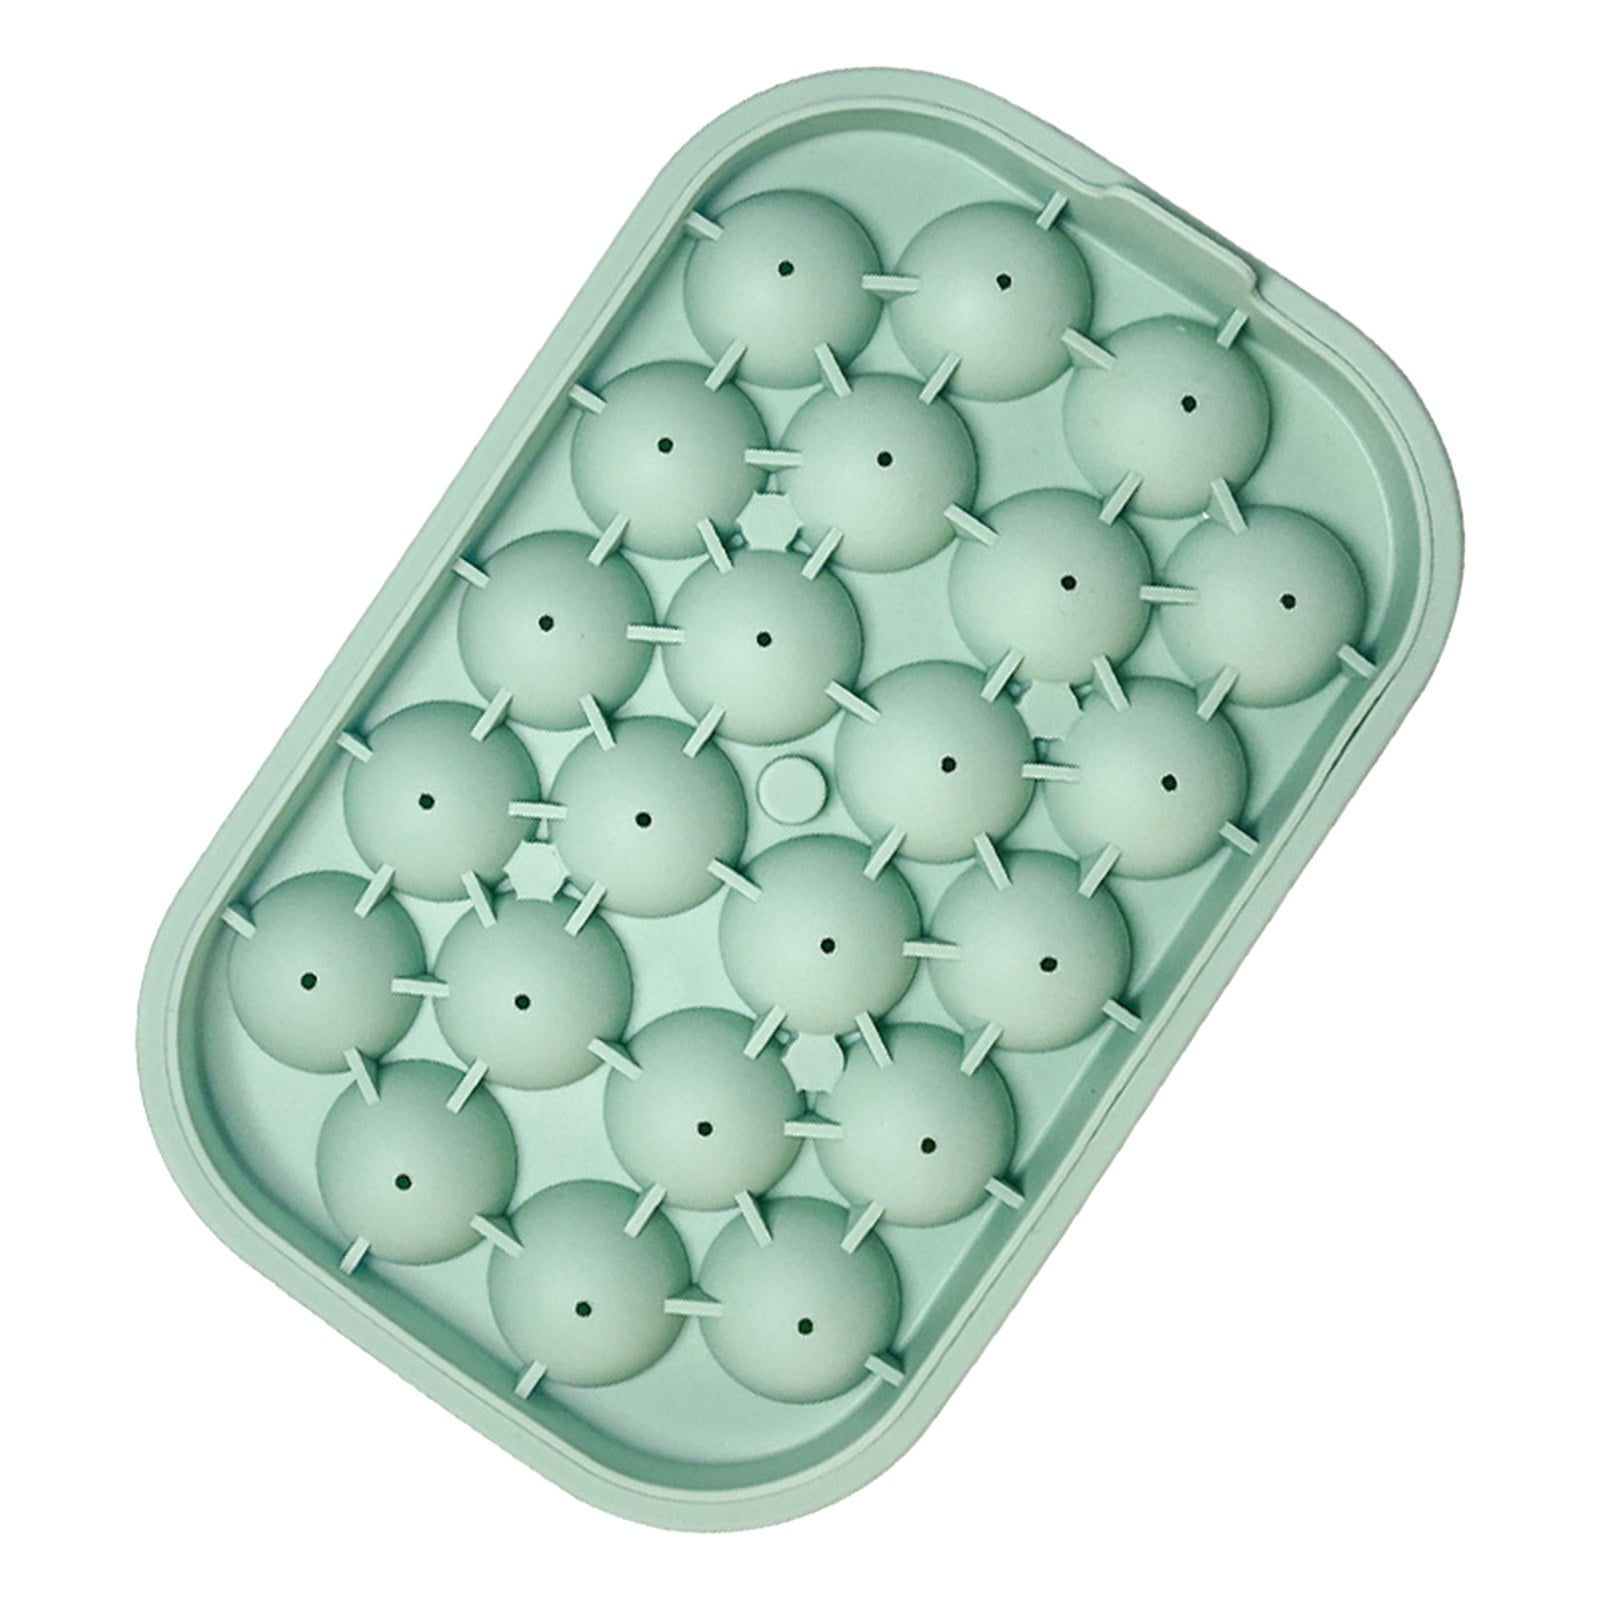 Sdjma Round Ice Cube Trays, Mini Ice Ball Maker Mold for Freezer, Easy-Release Silicone & Flexible Circle Ice Cube Tray Making 22pcs Sphere Ice